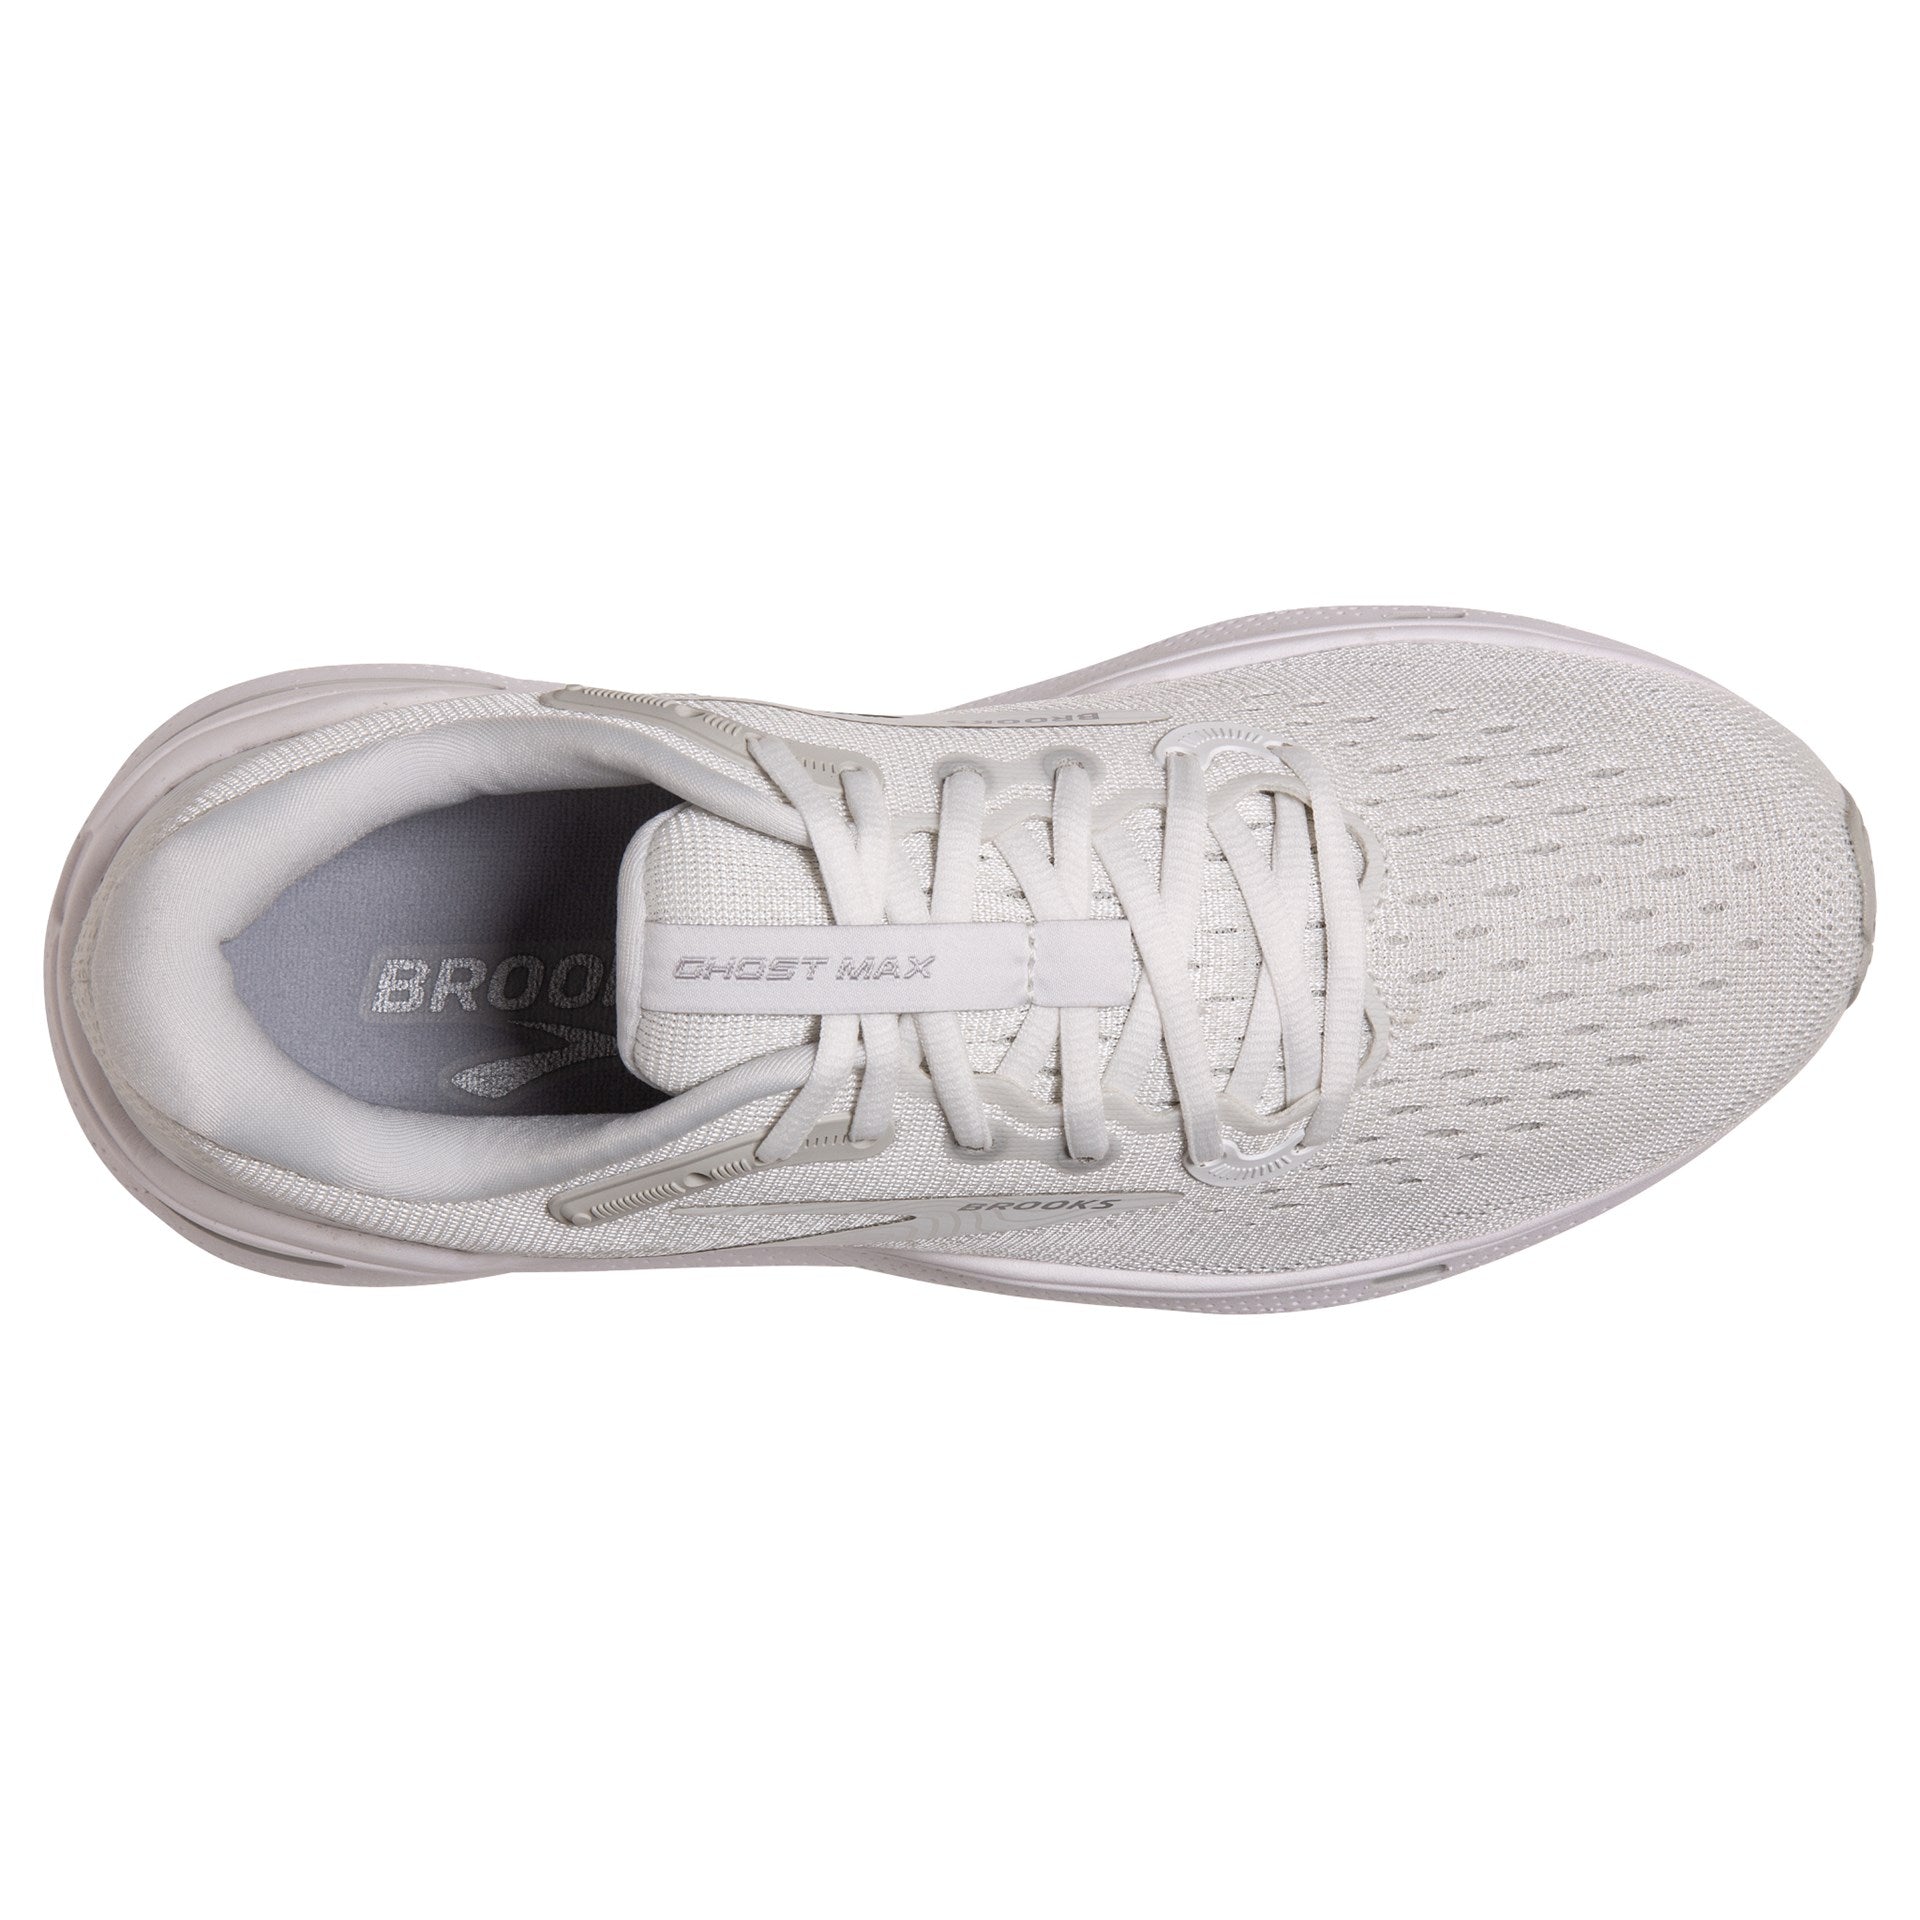 BROOKS WOMEN'S GHOST MAX - B - 124 WHITE/OYSTER 